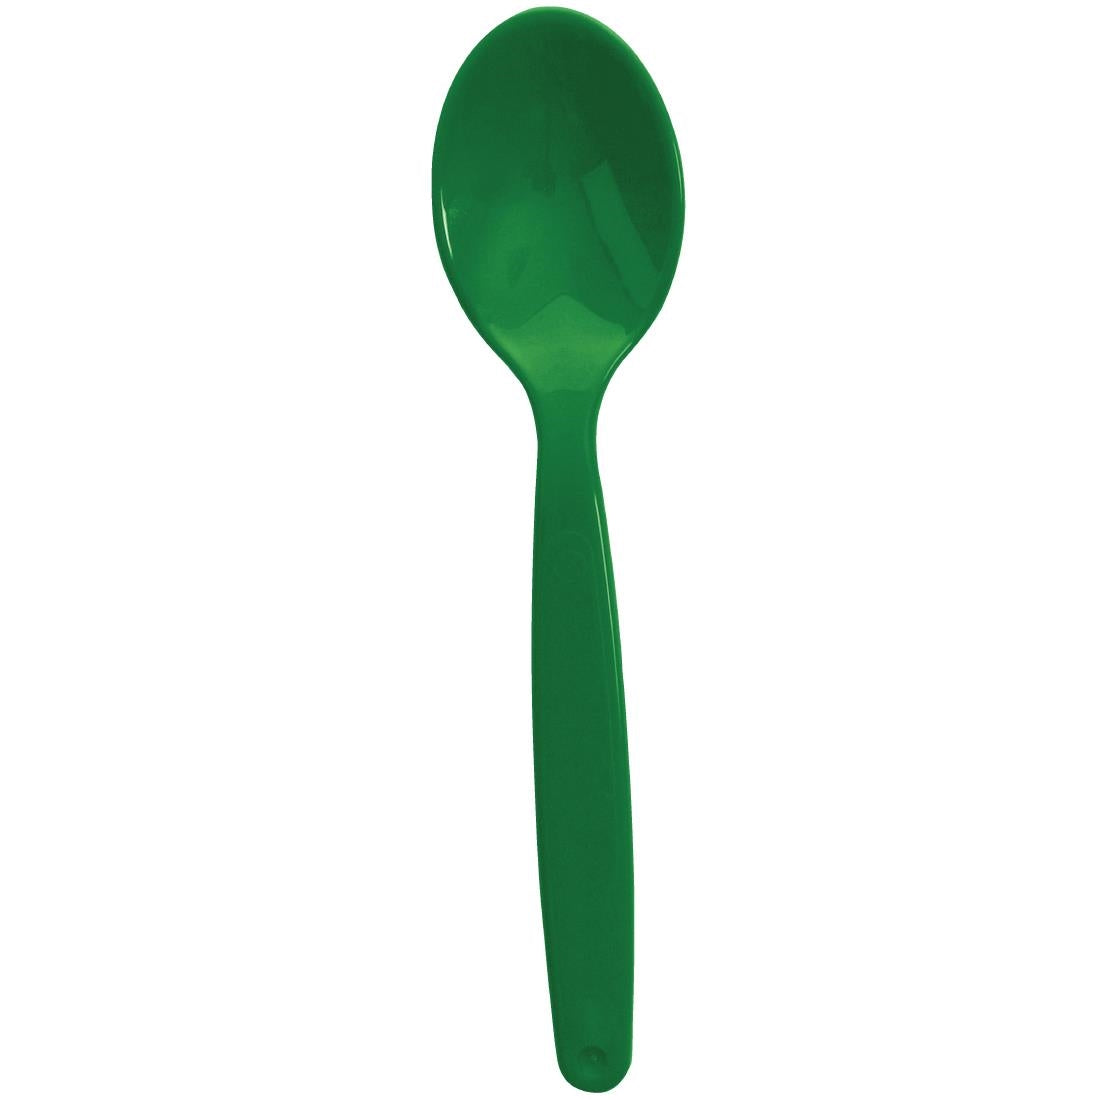 DL124 Polycarbonate Spoon Green Kristallon (Pack of 12) JD Catering Equipment Solutions Ltd